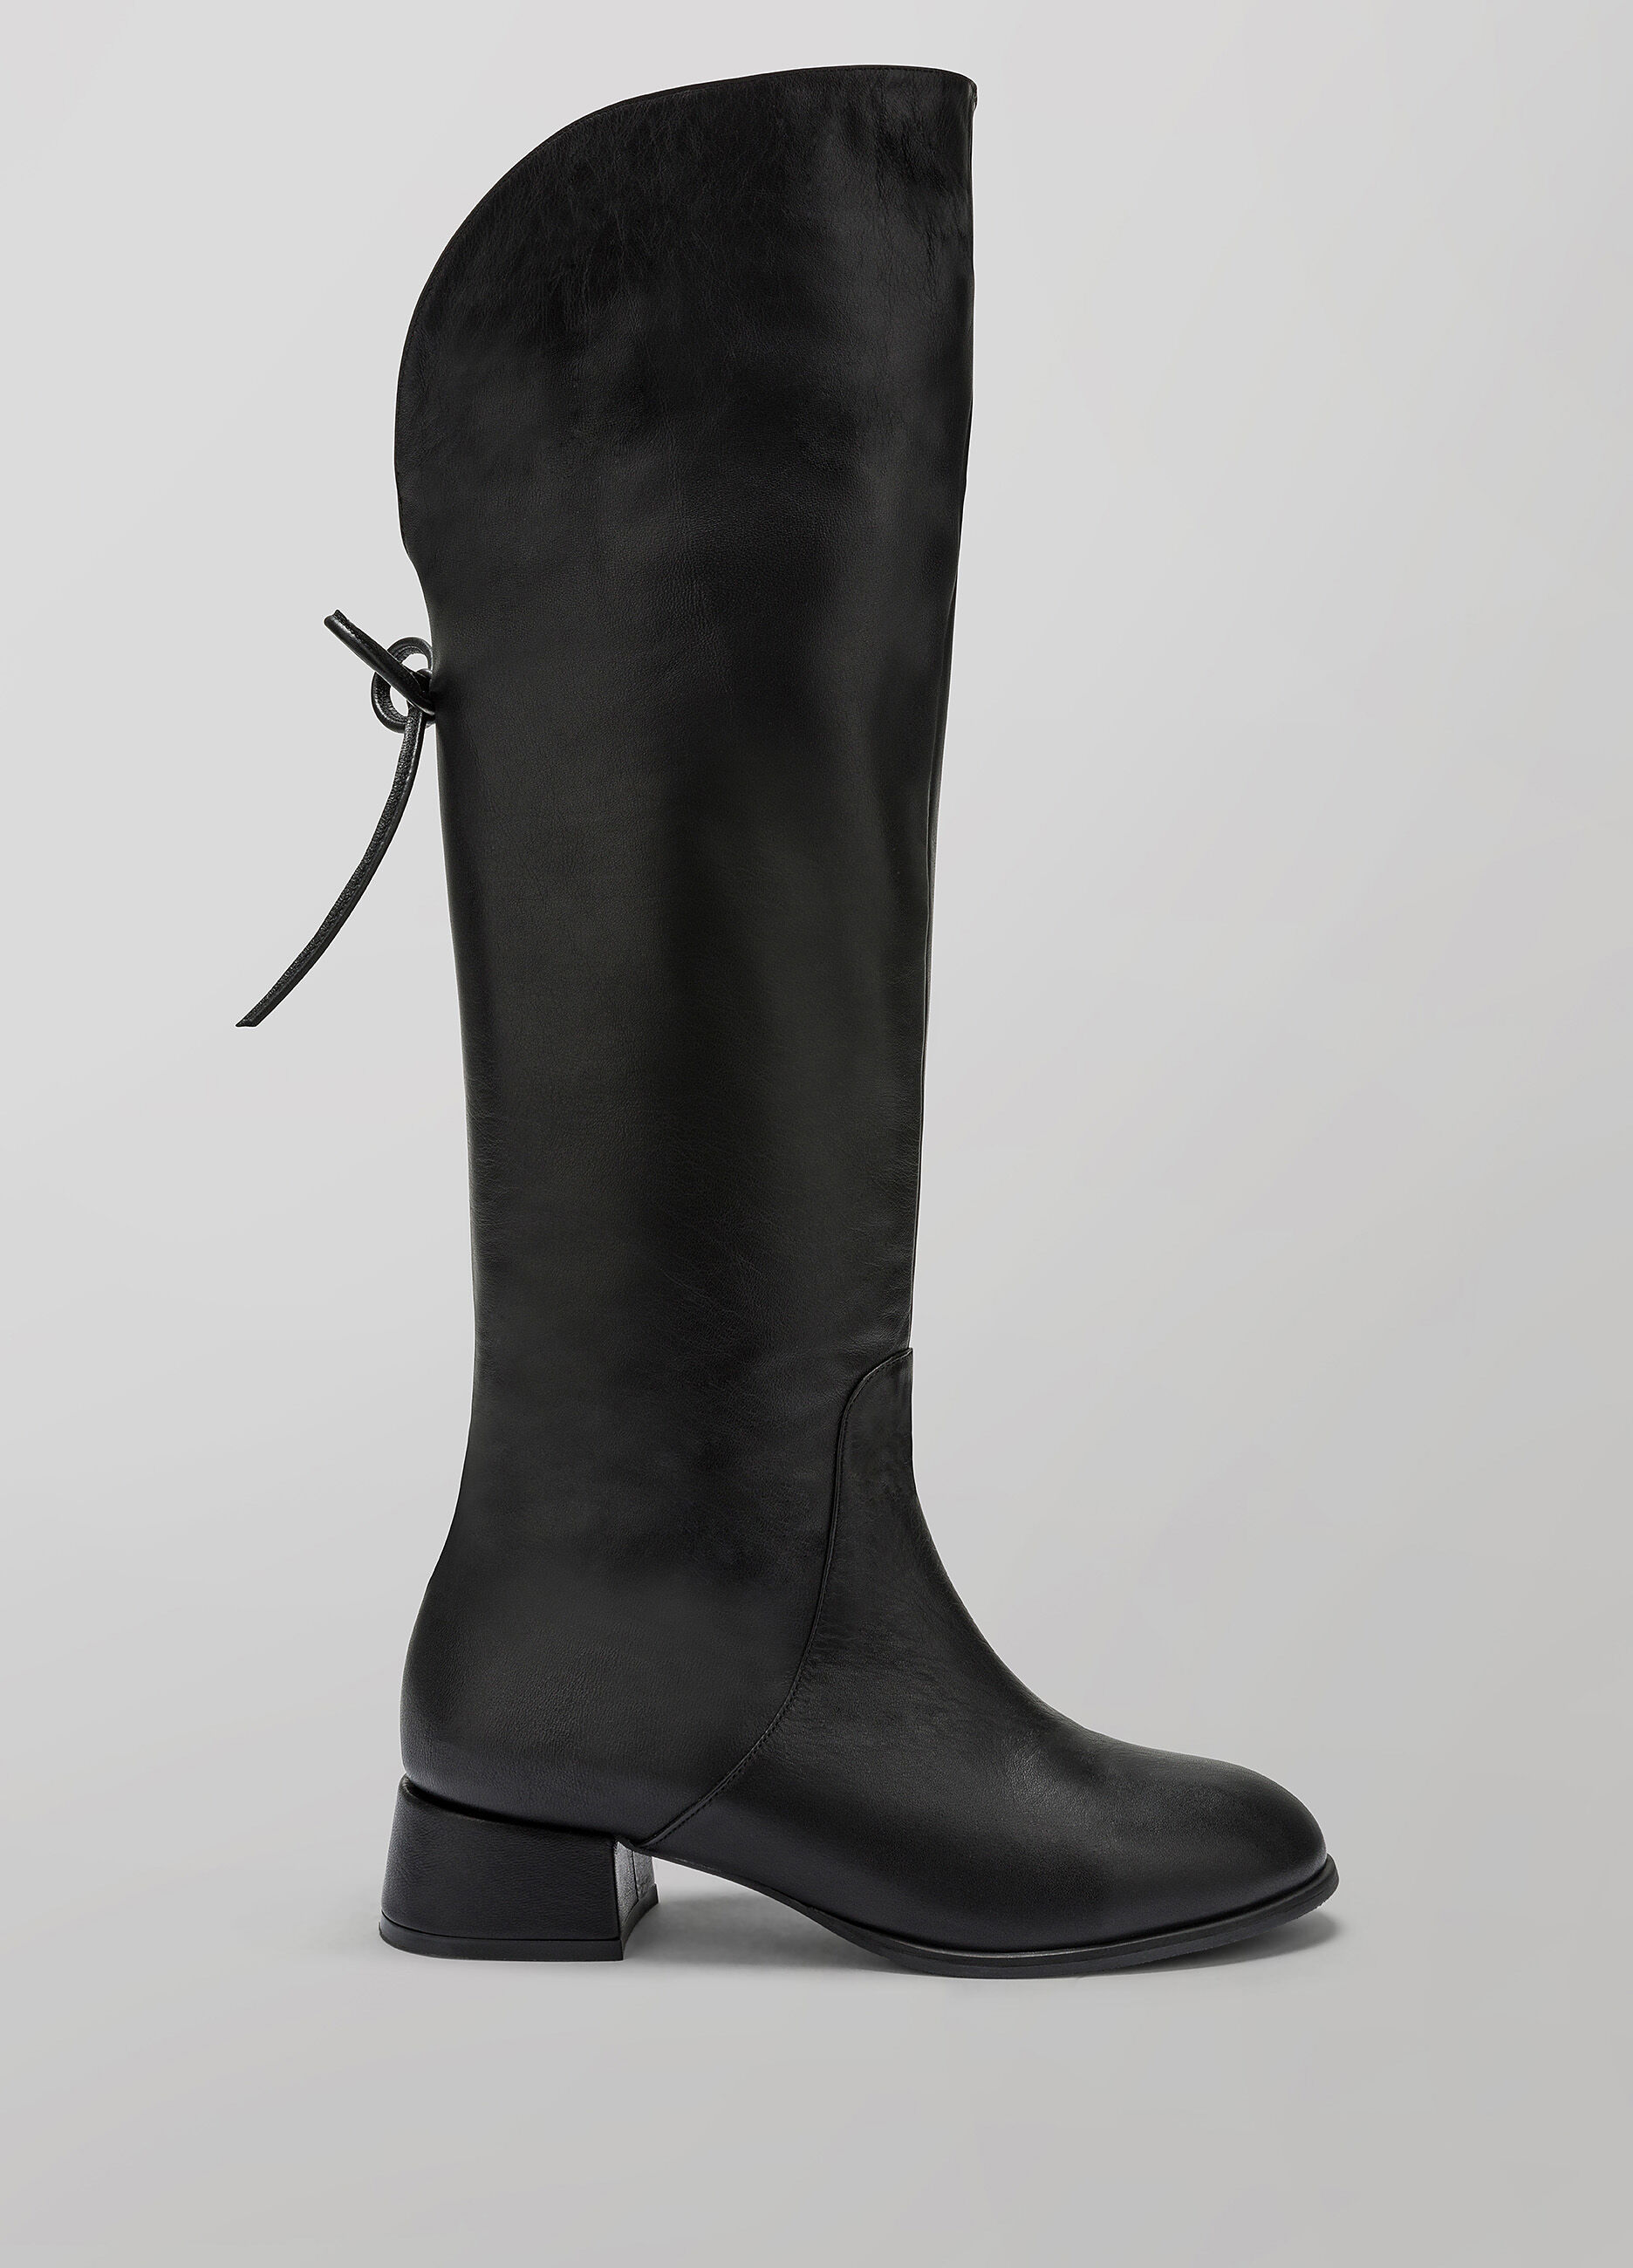 Black faux leather knee-high boot